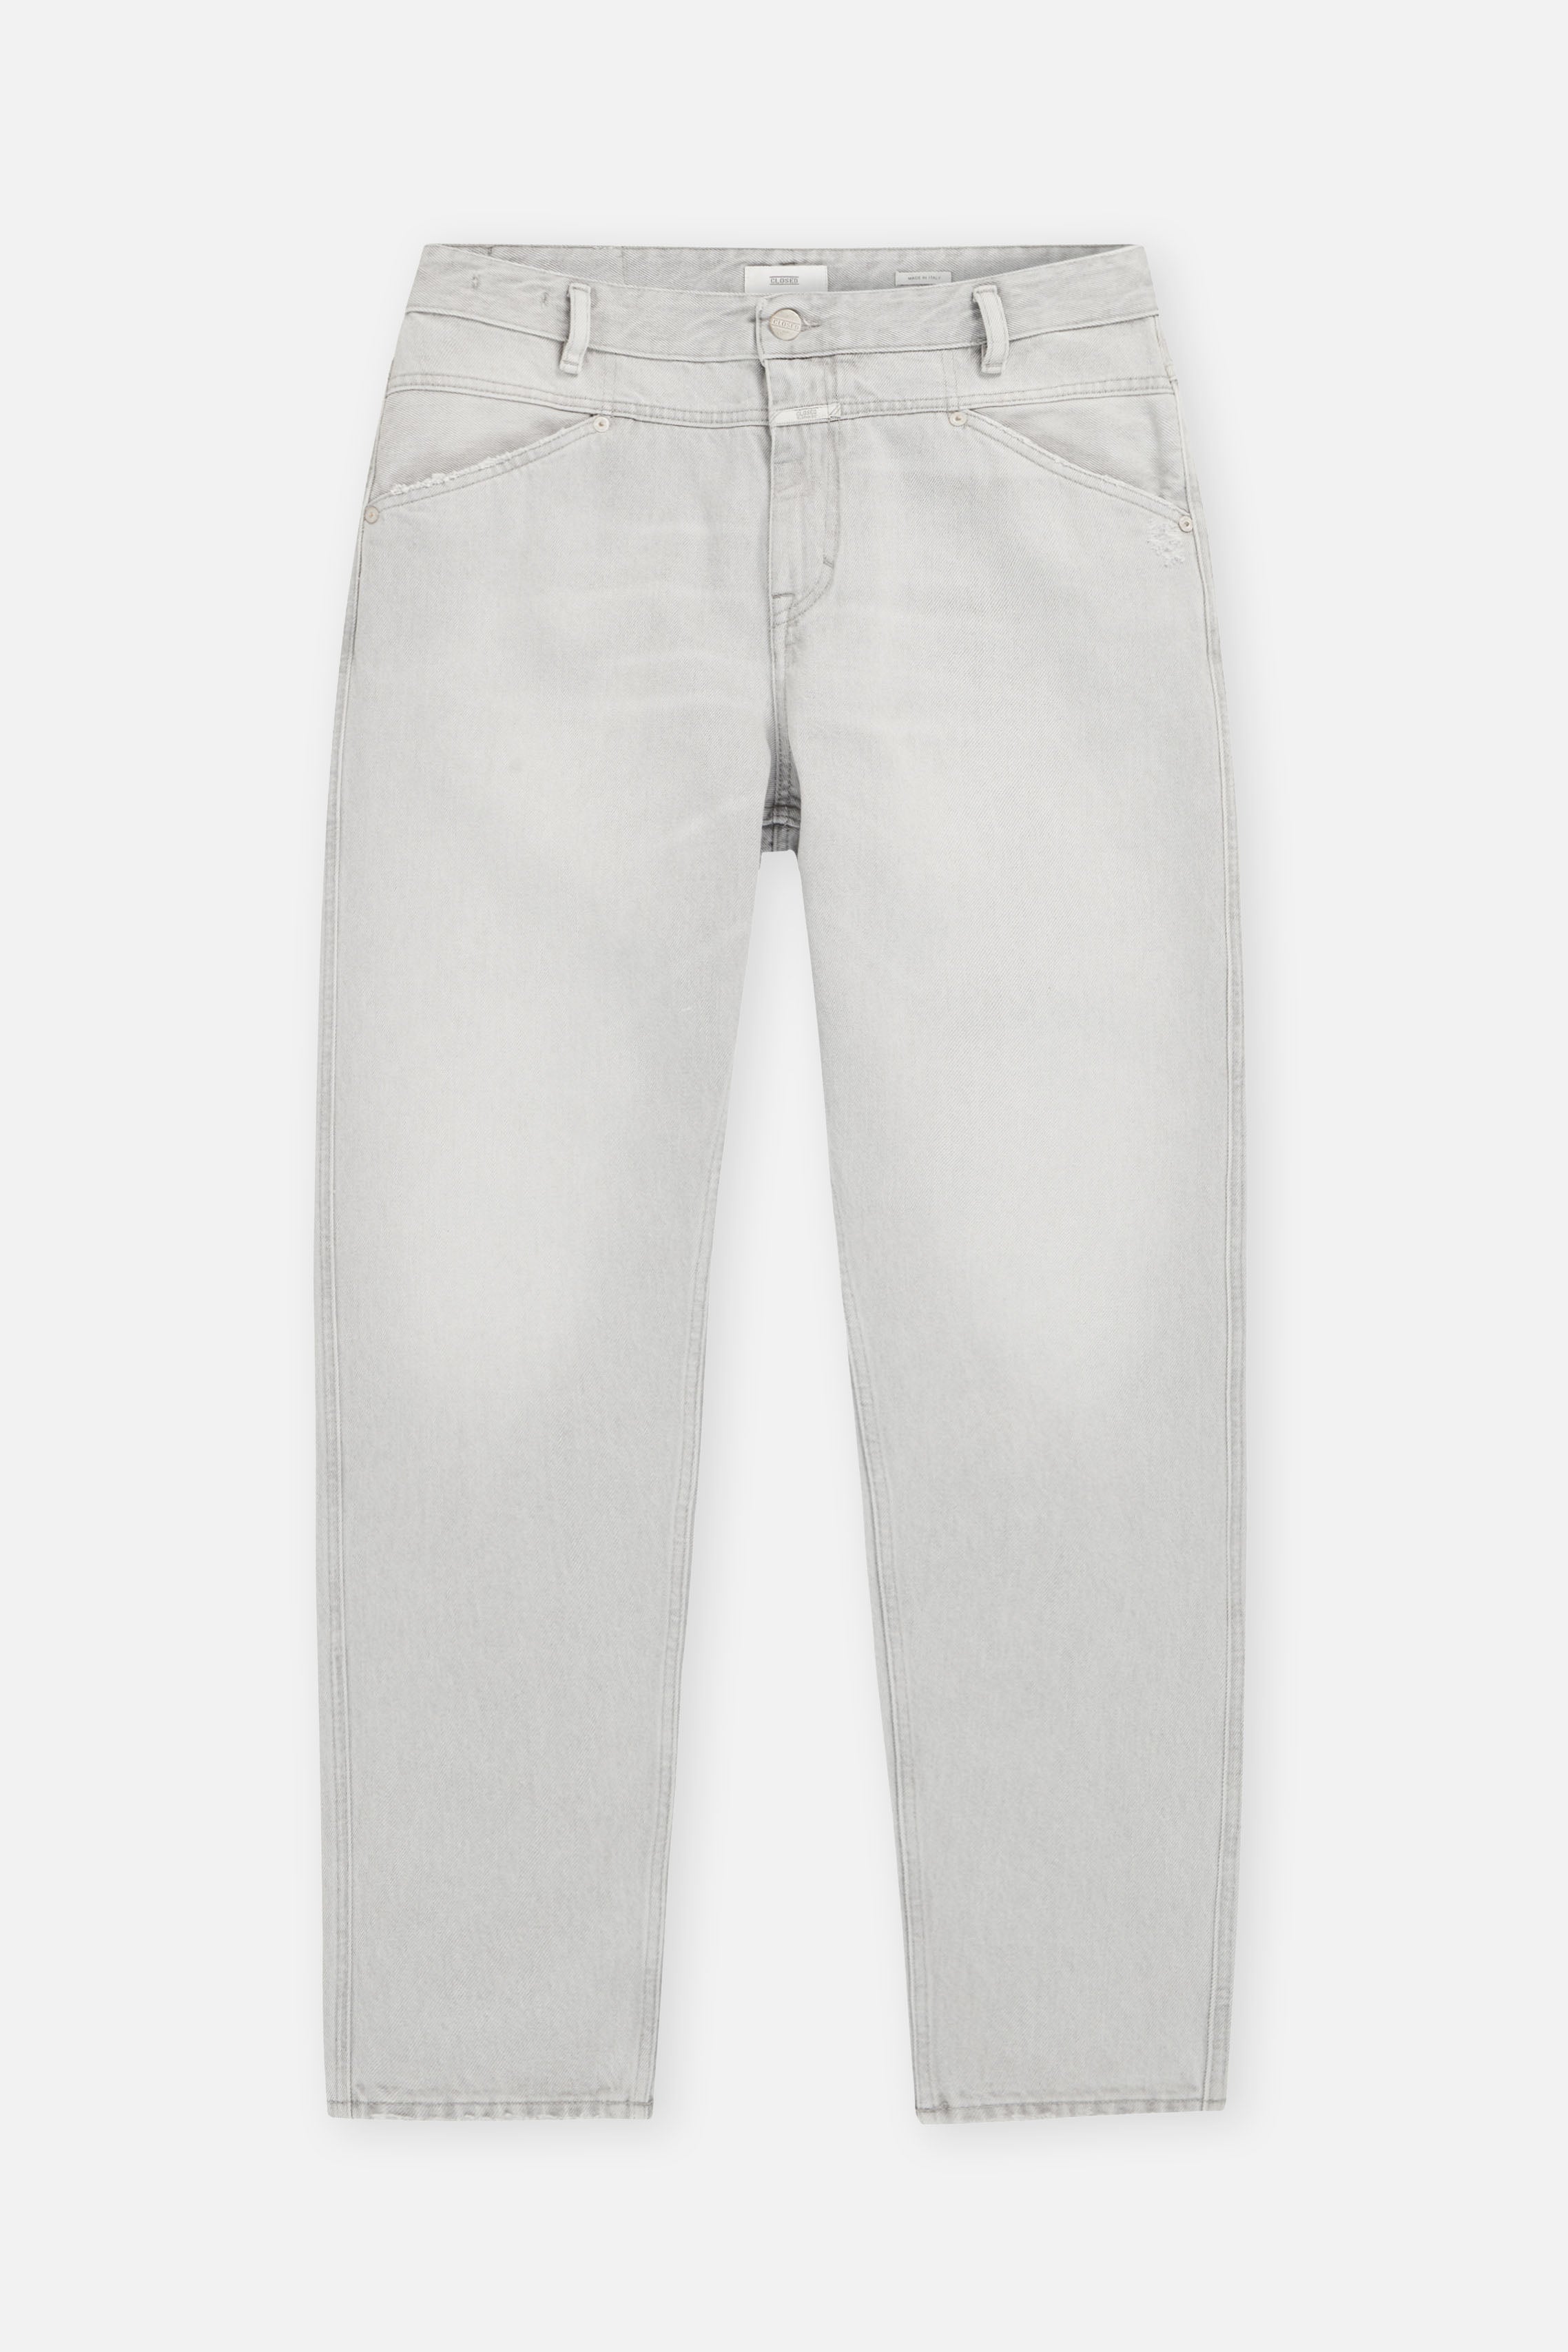 CLOSED-OUTLET-SALE-STYLE-NAME-X-LENT-TAPERED-JEANS-Hosen-ARCHIVE-COLLECTION-4_30a01379-61d7-4ec1-bc99-21acd454c219.jpg